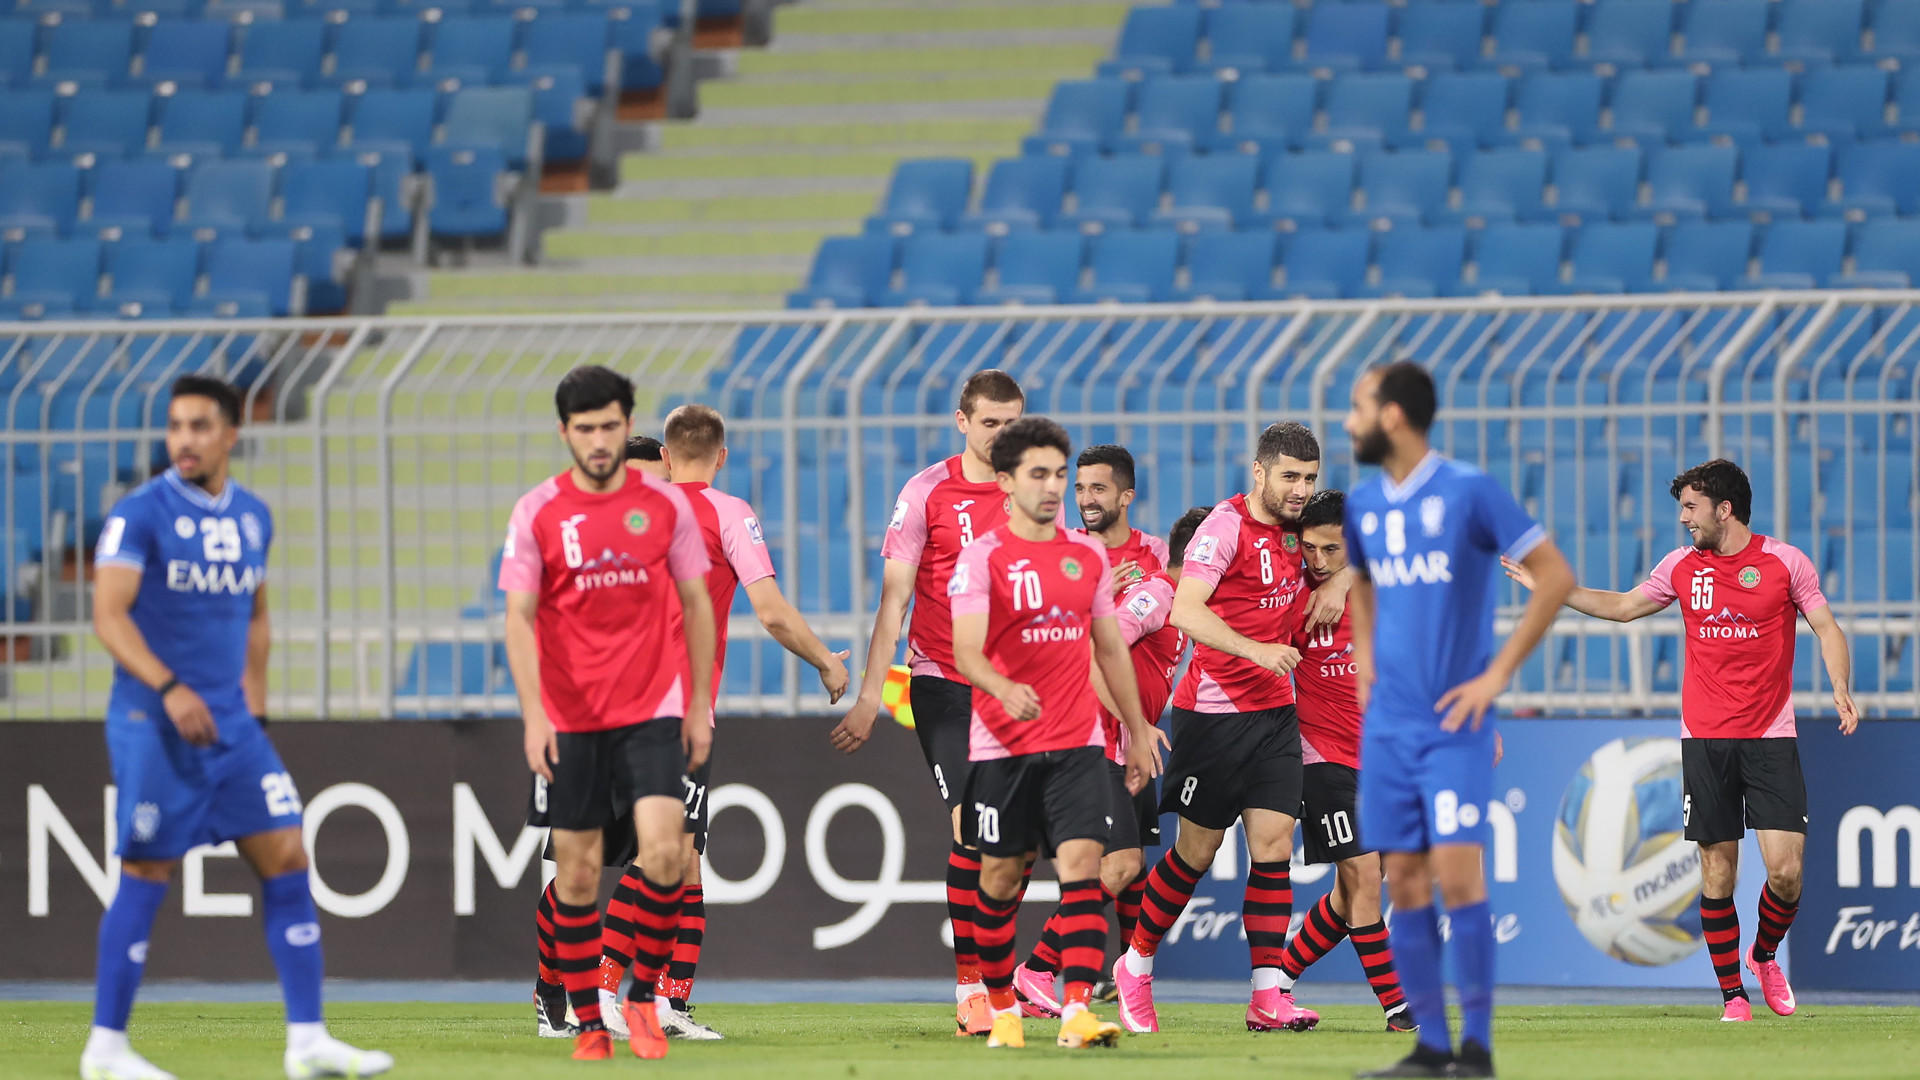 5 things to watch out for as AFC Champions League group stage kicks off